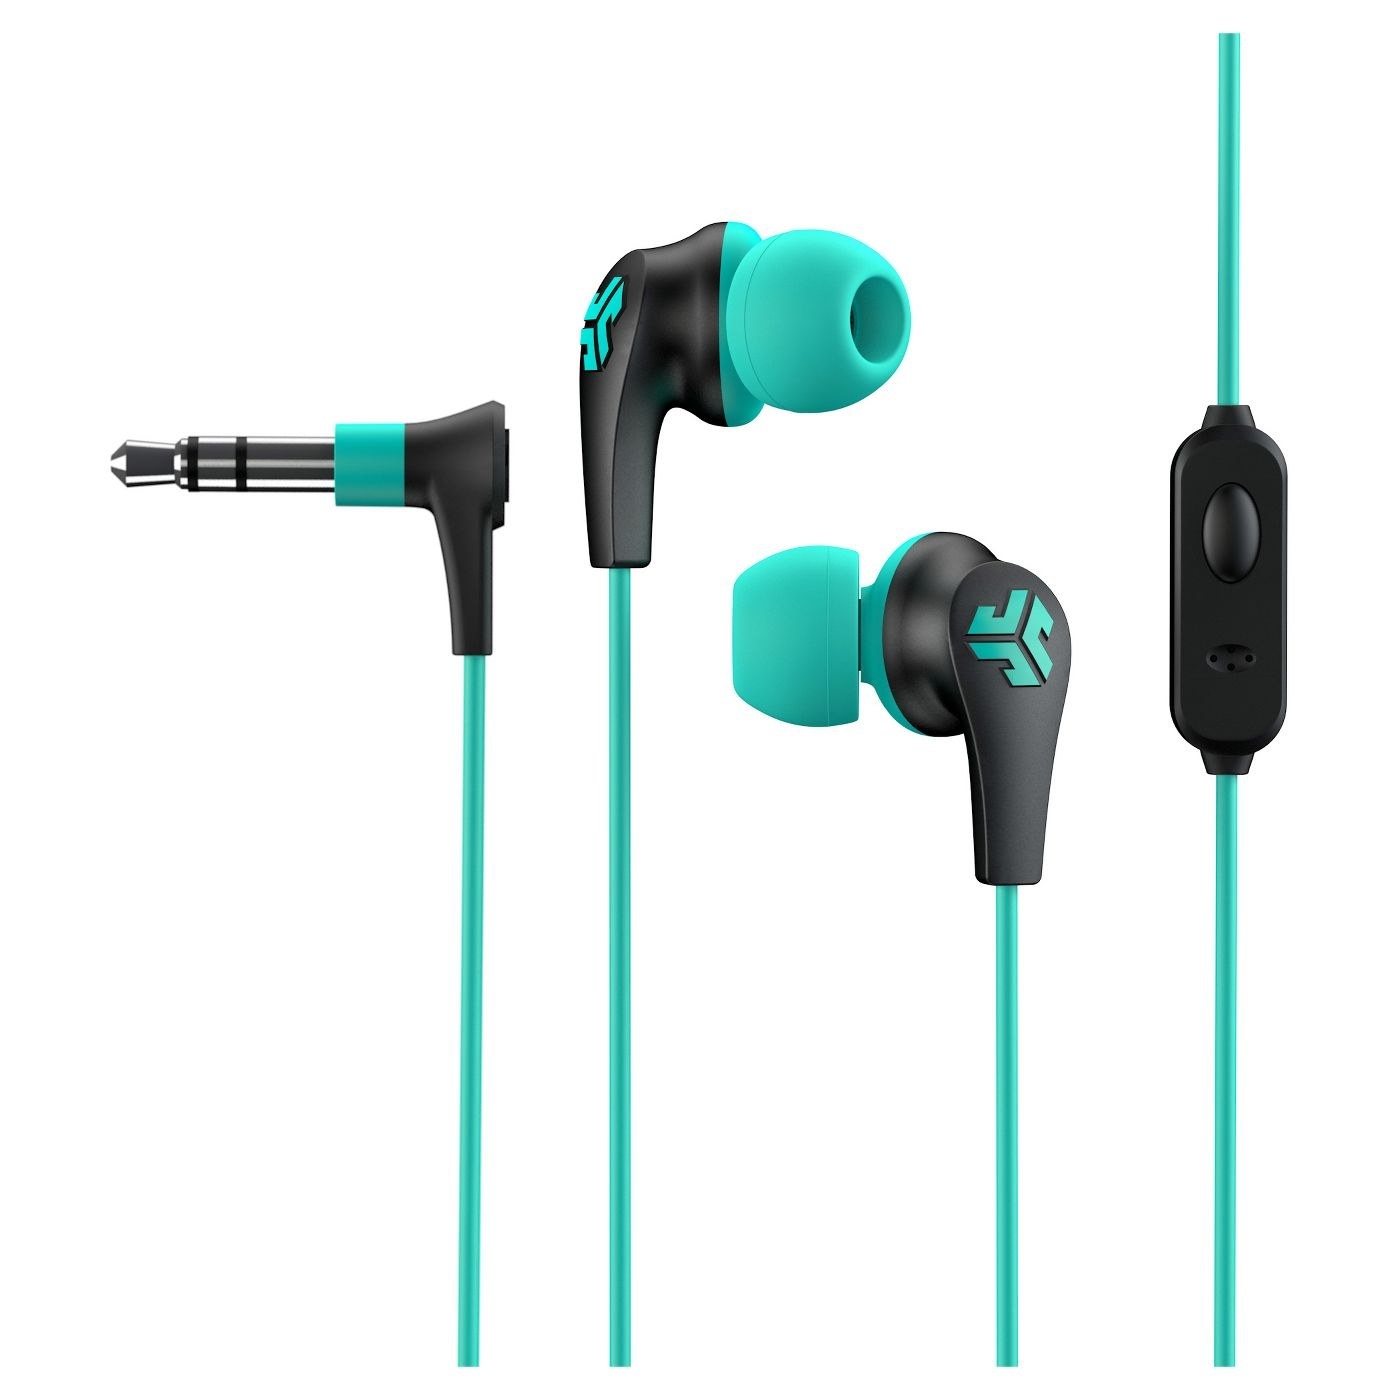 A pair of black and teal wired headphones